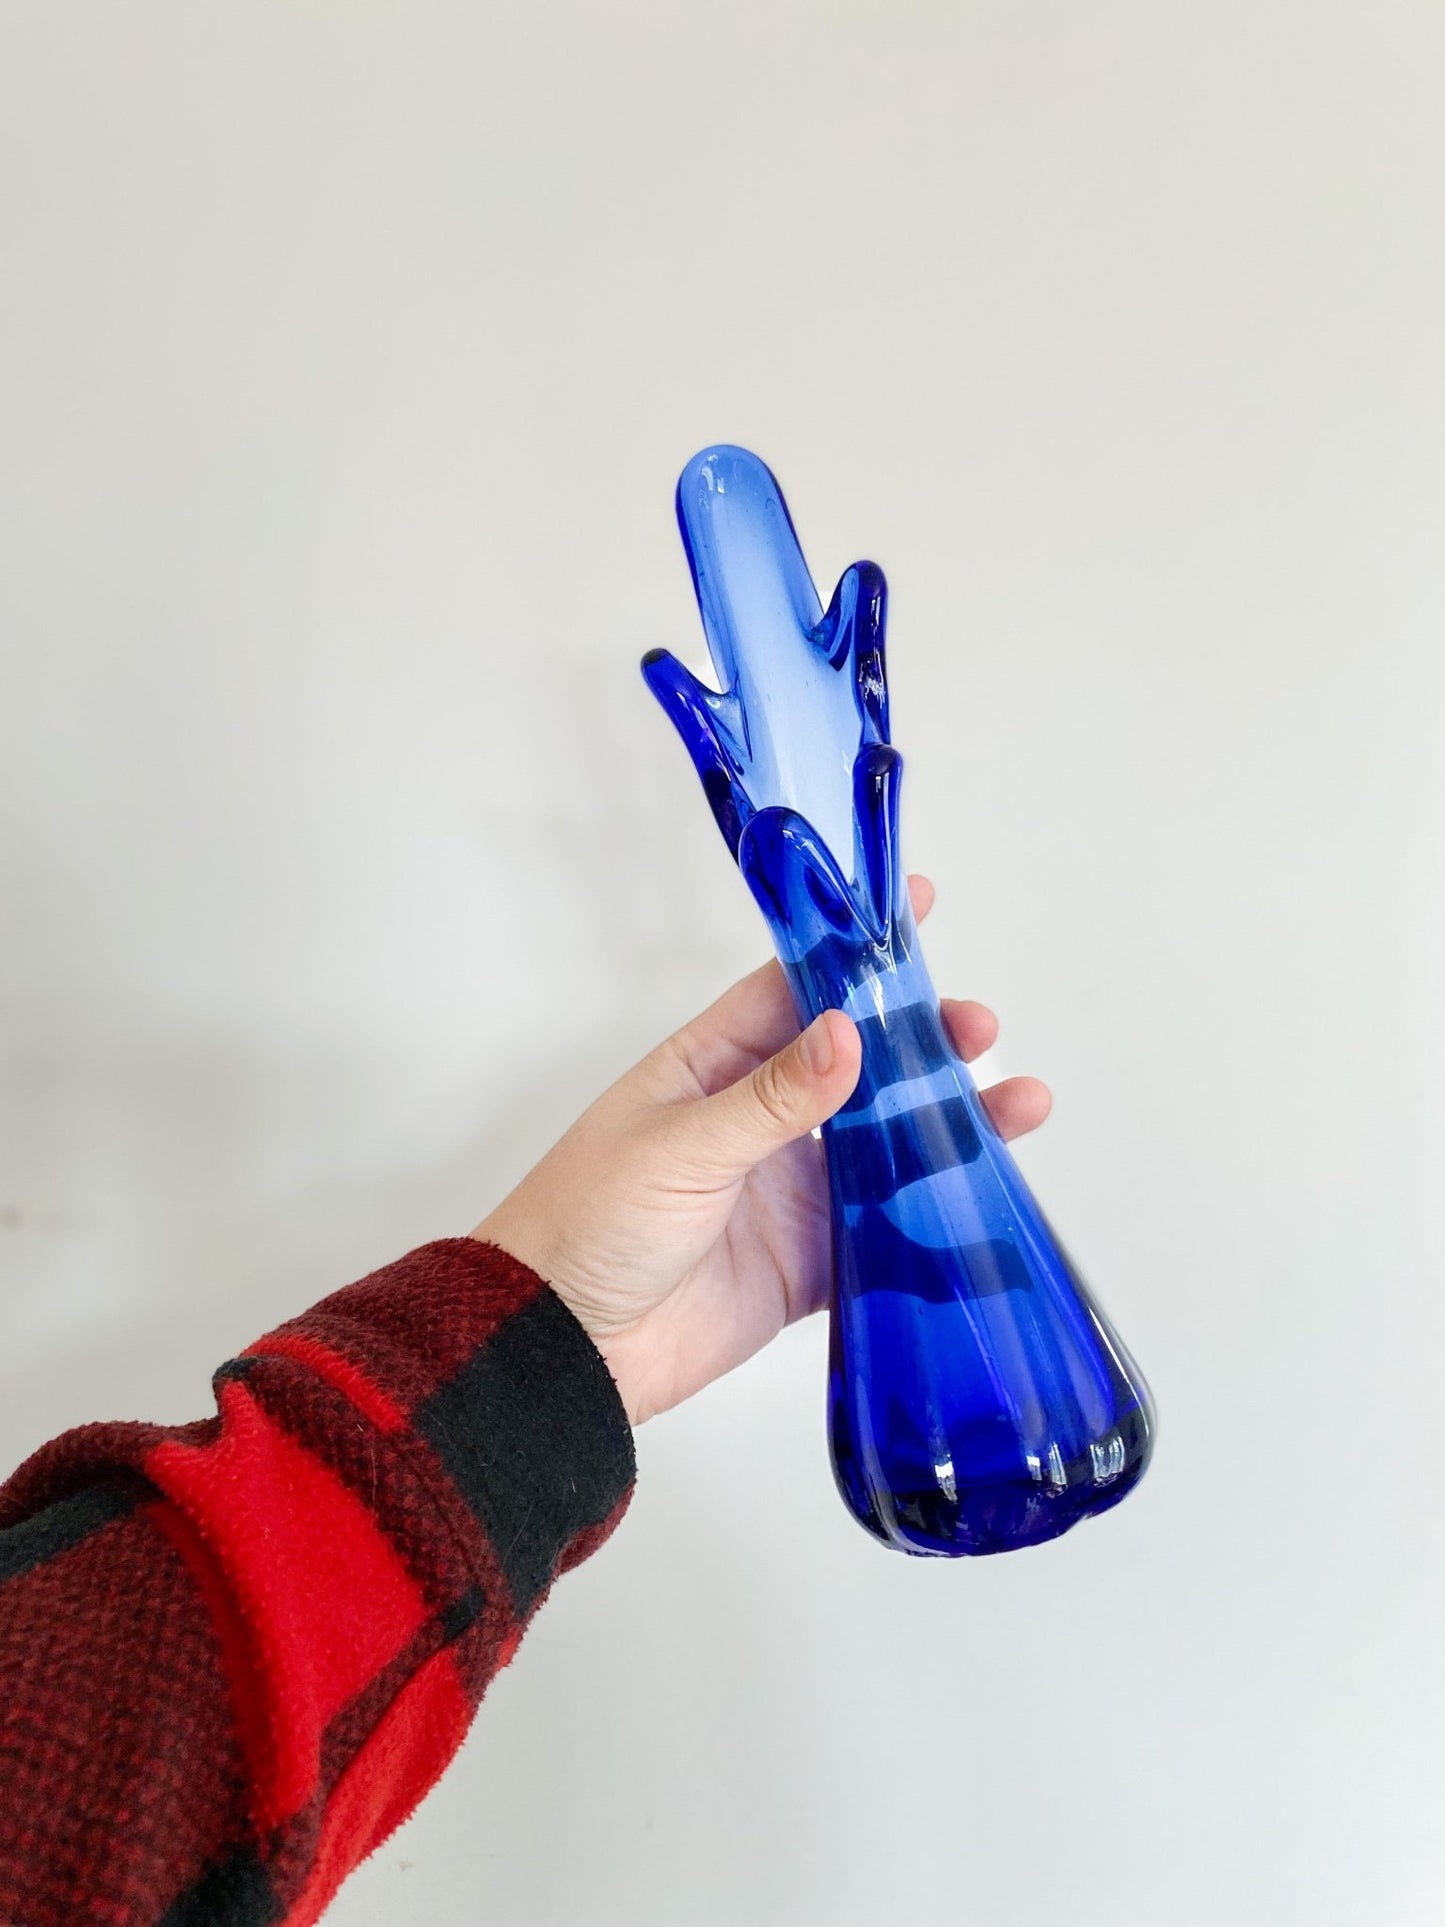 Vintage MCM Swung Glass Vase in Peacock Blue - Perth Market